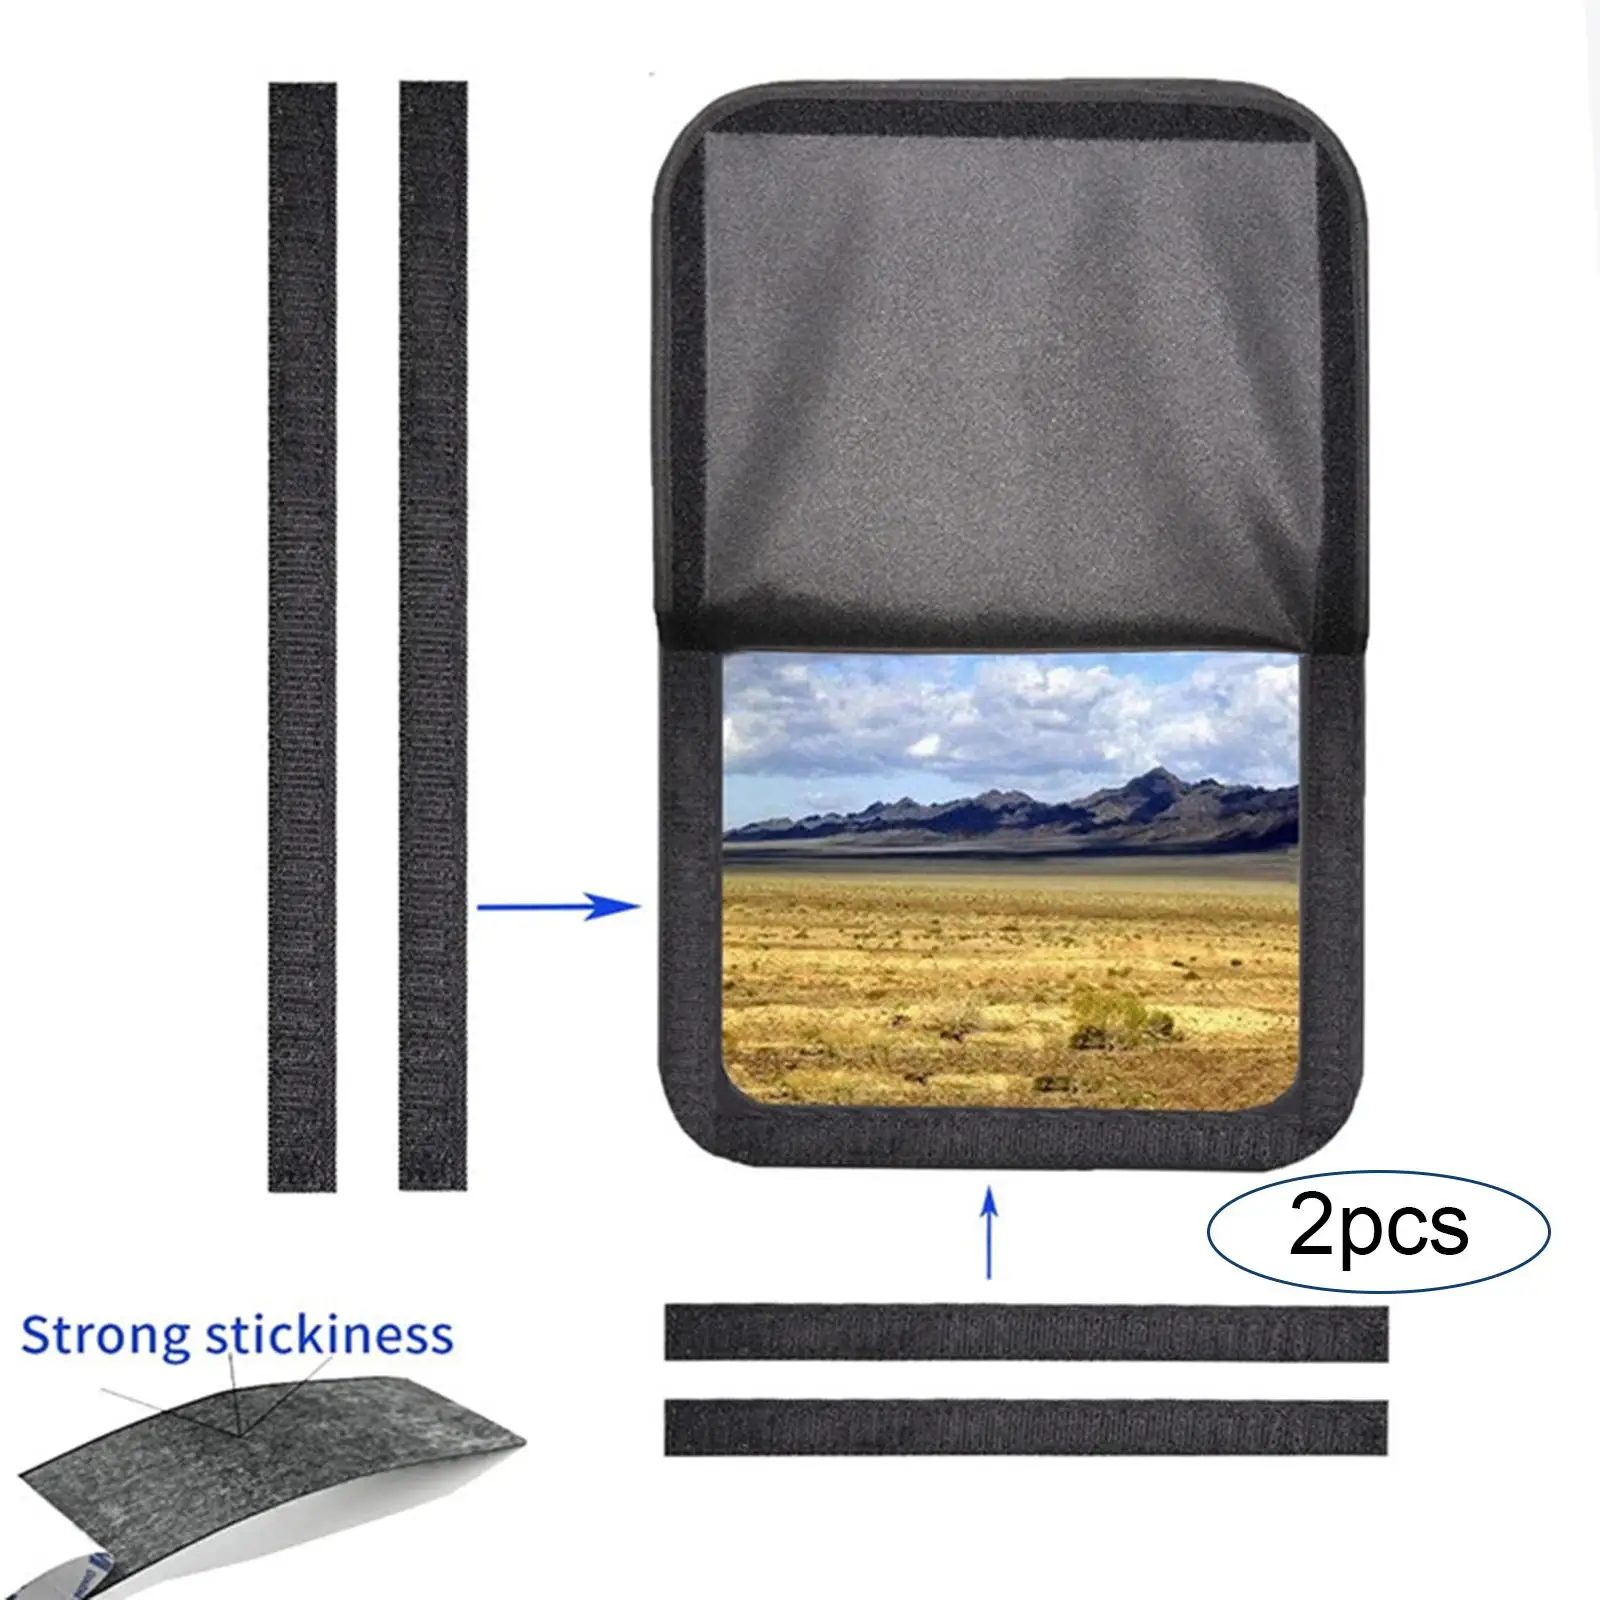 Door Window Fabric Blackout Fabric Black Camper Sunshade for Campers